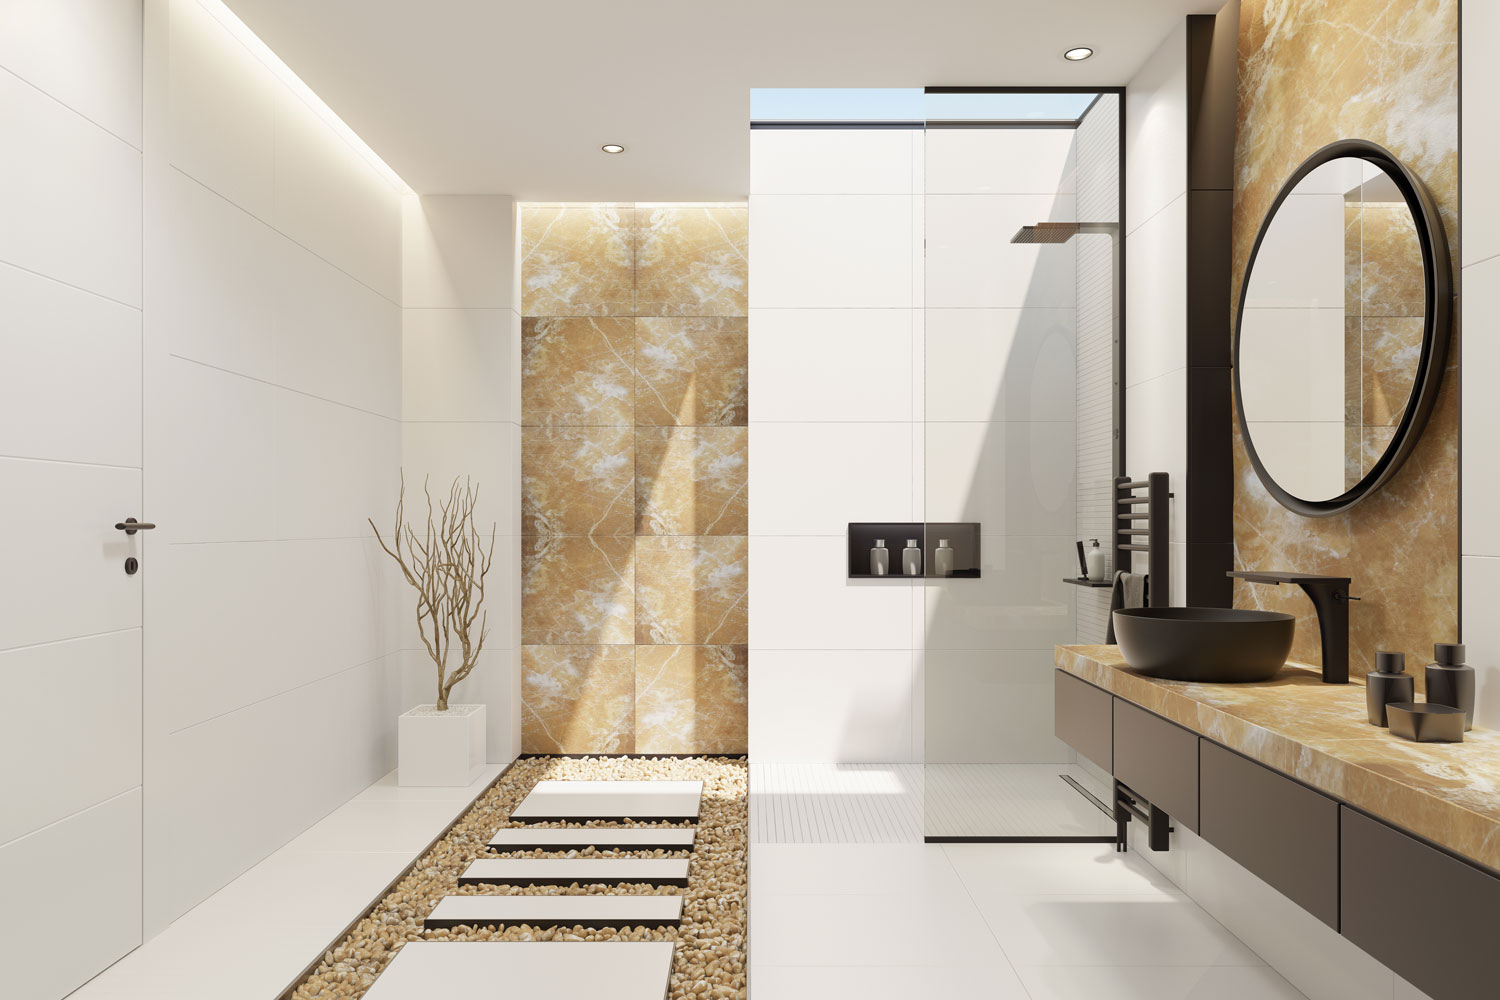 Ultra modern white bathroom with white walls, a pebble path walk and sunroof on the shower area